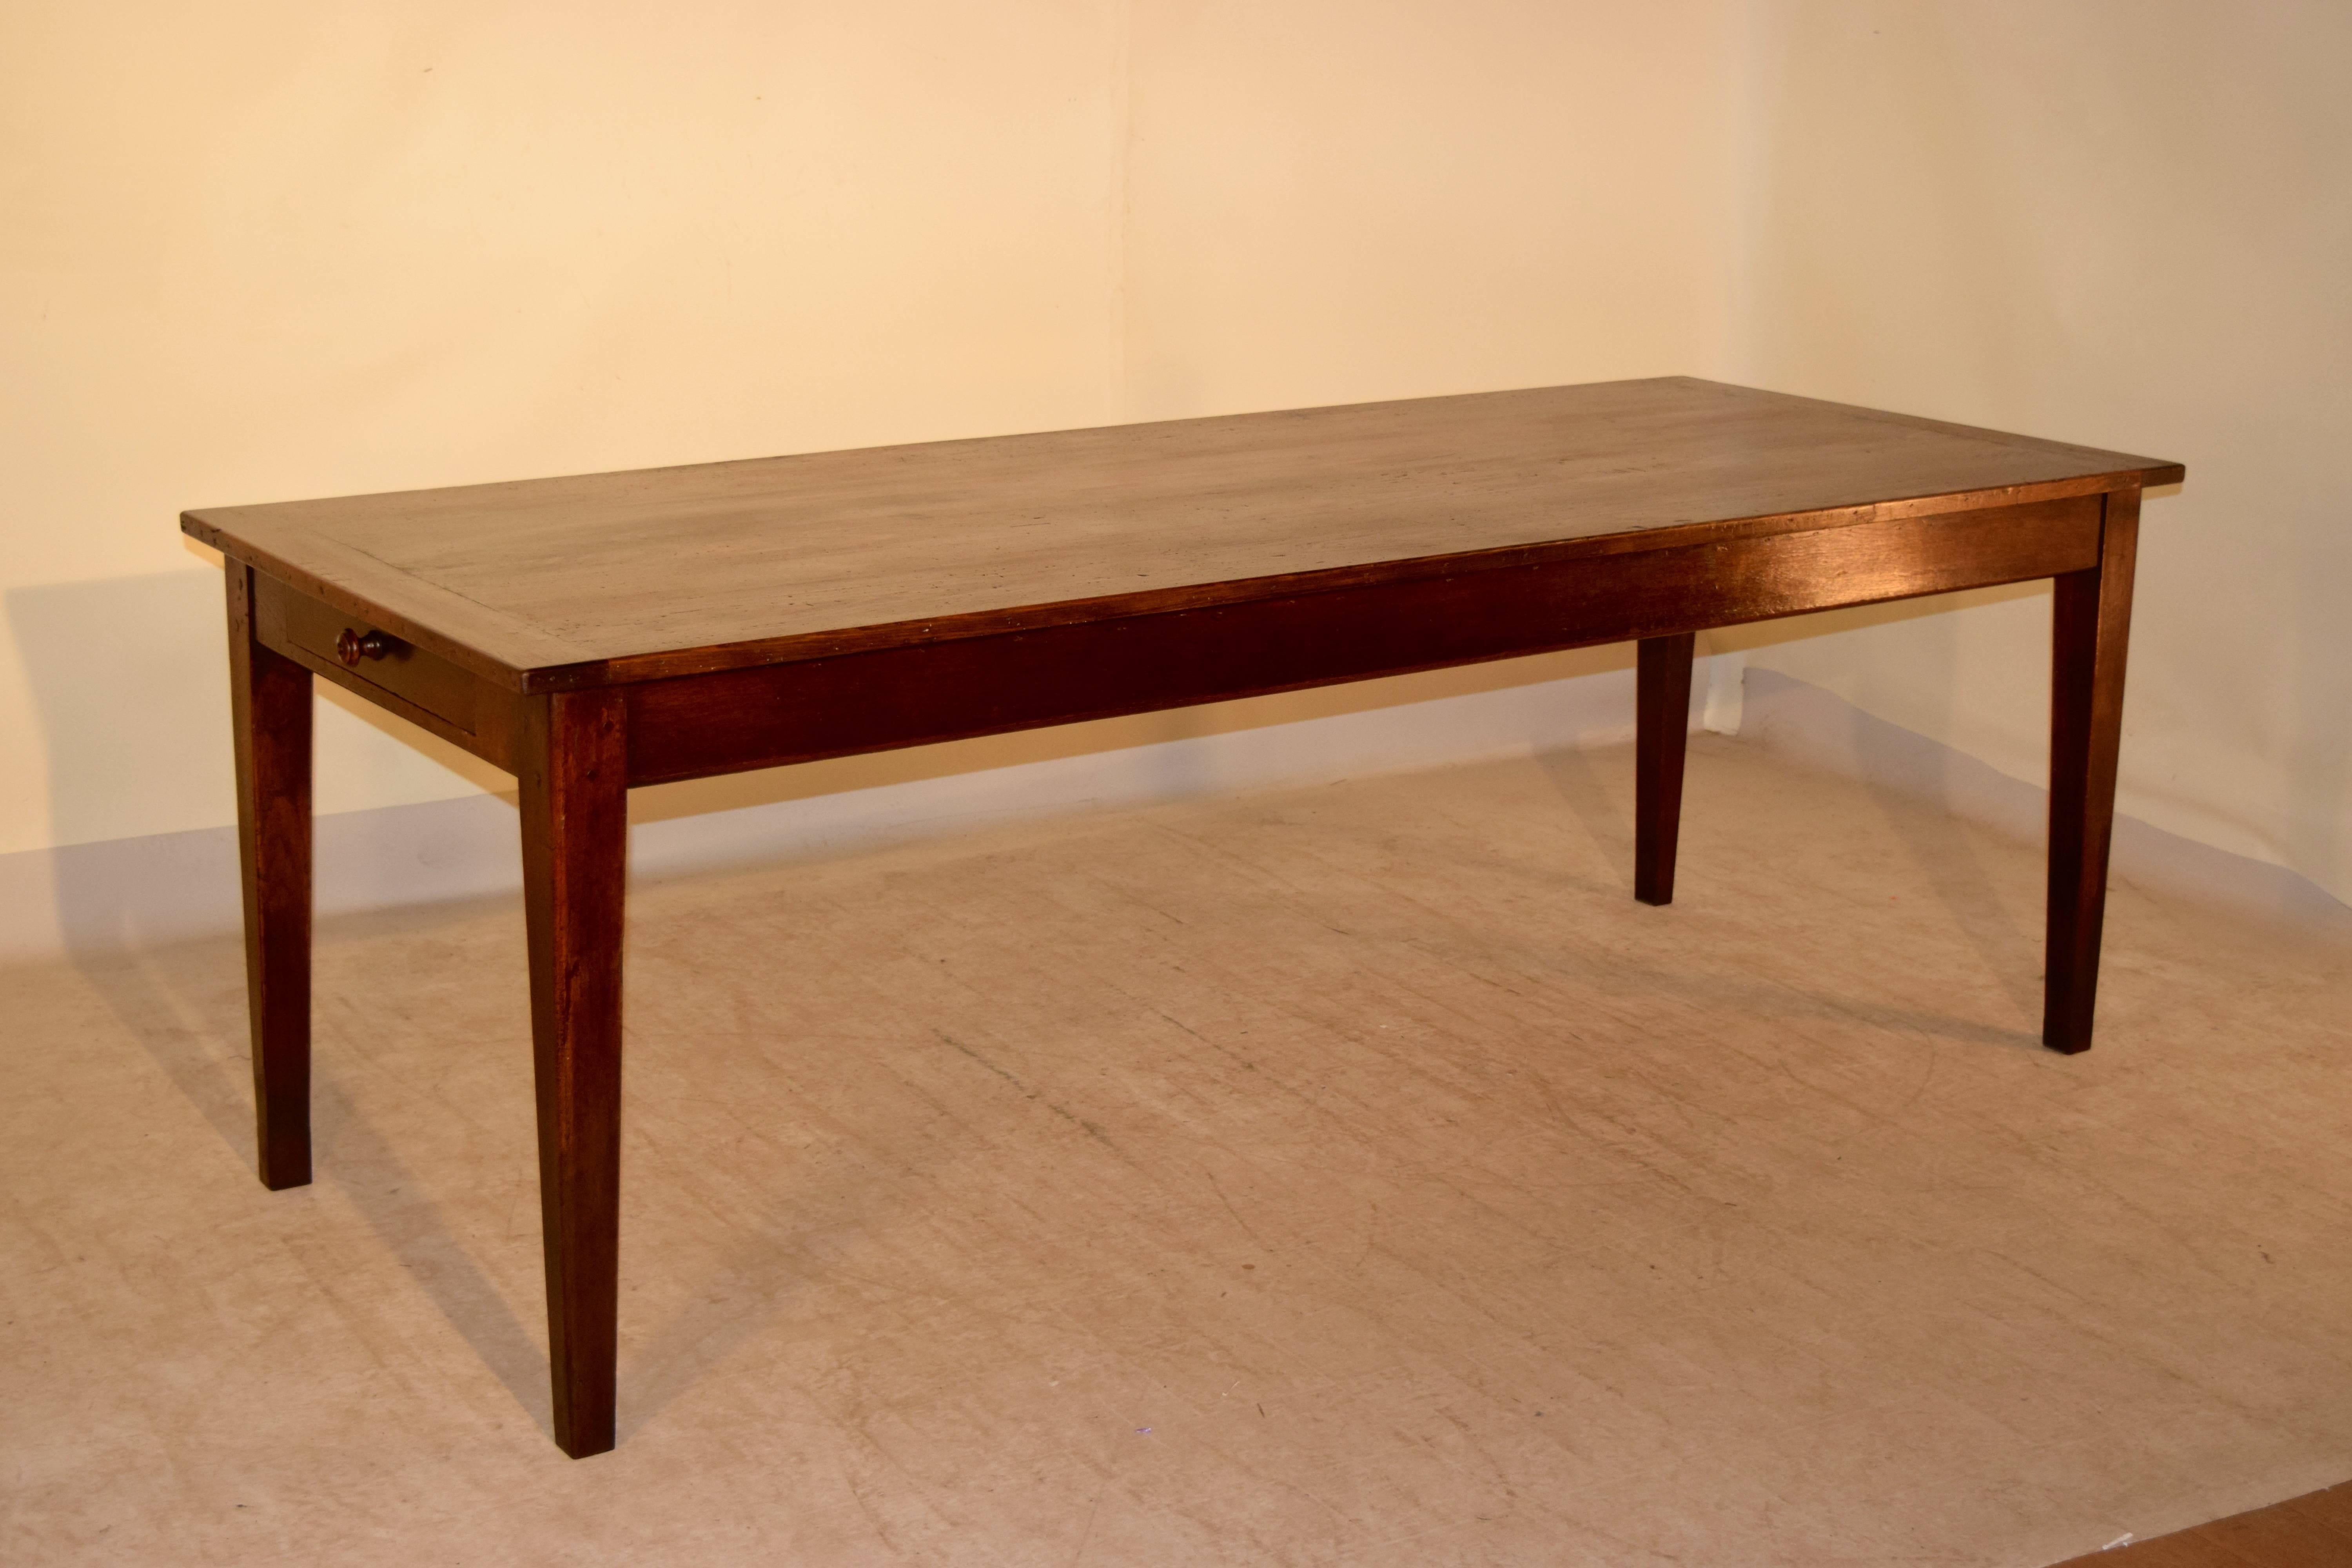 19th century French farm table with a pine top which has bread board ends. The base is made of oak and has a simple apron and has a large drawers, one on each end supported on simple tapered legs. The apron measures 24.88